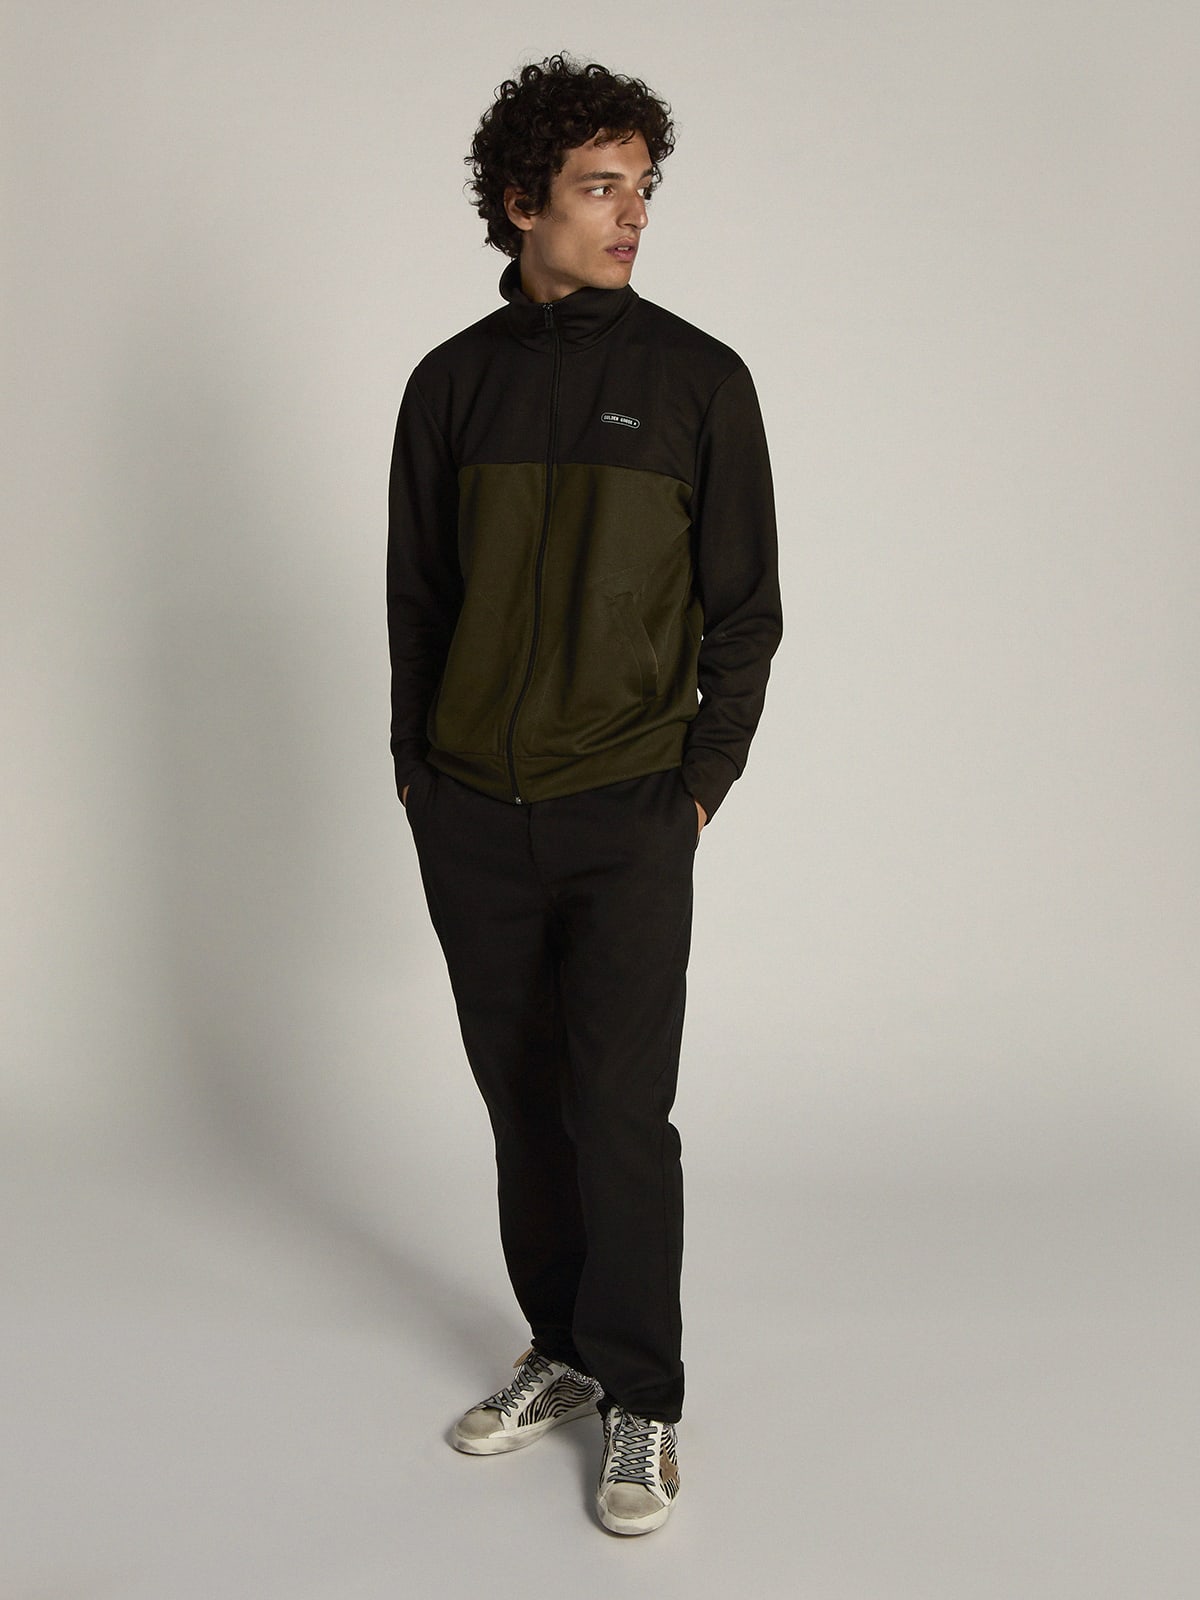 Game EDT Capsule Collection jacket in black and military-green color